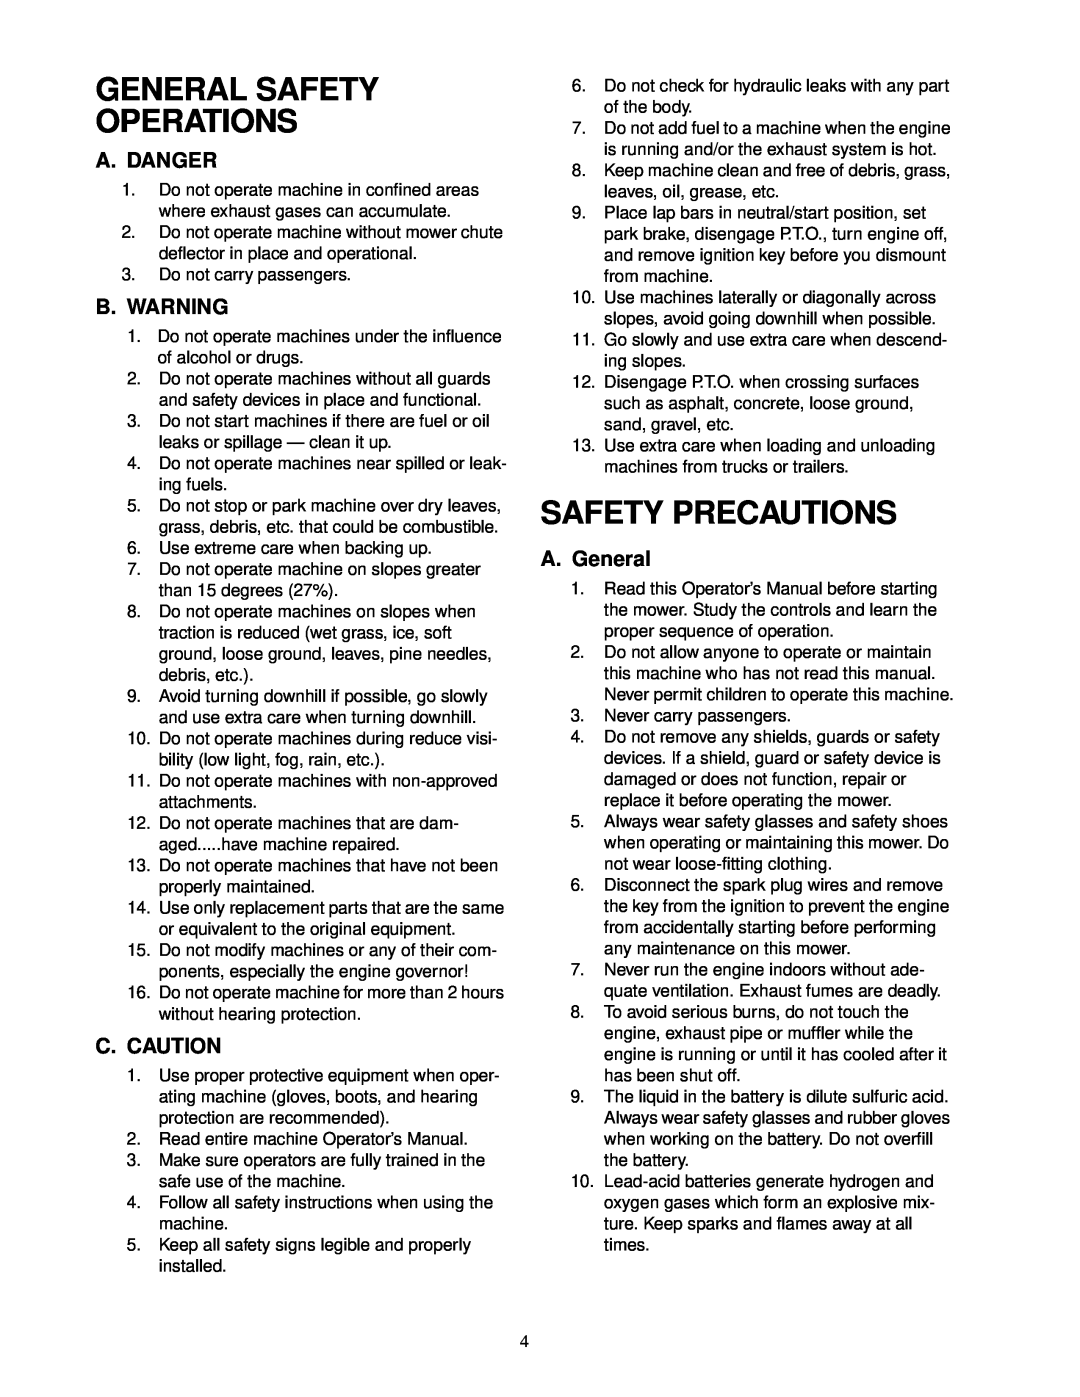 Cub Cadet 18HP service manual General Safety Operations, Safety Precautions, A.Danger, B.Warning, C.Caution, A.General 